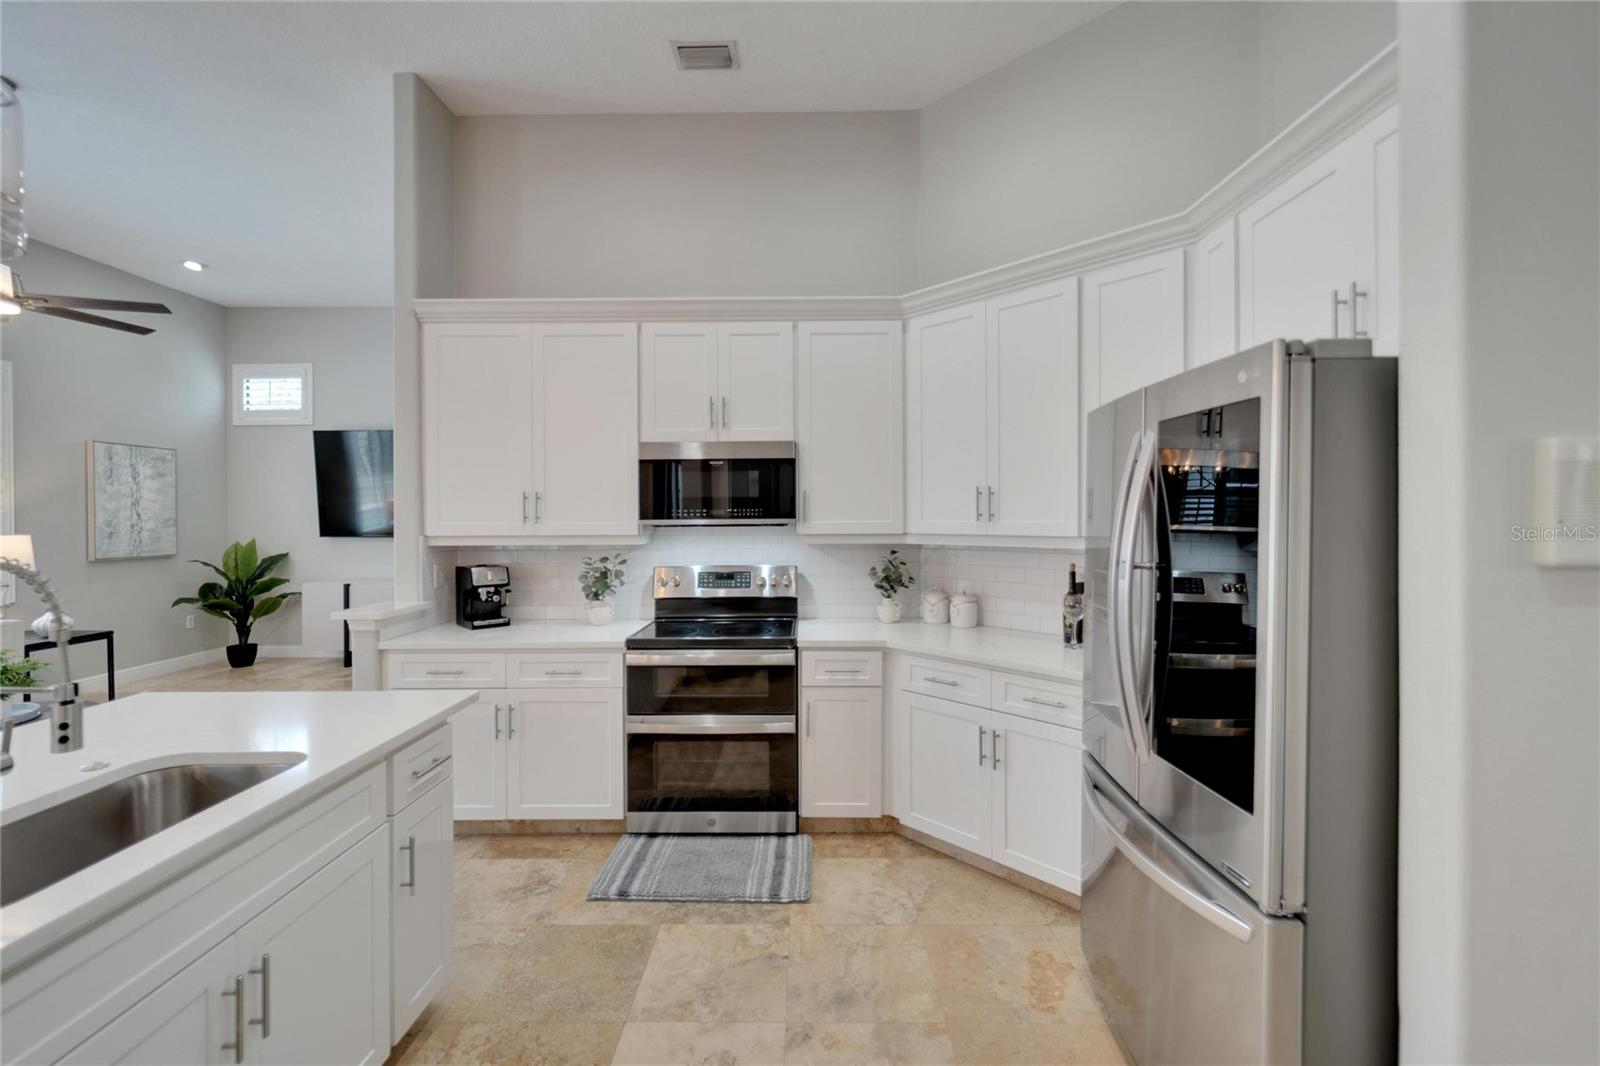 Gourmet kitchen with breakfast bar and large walk in pantry